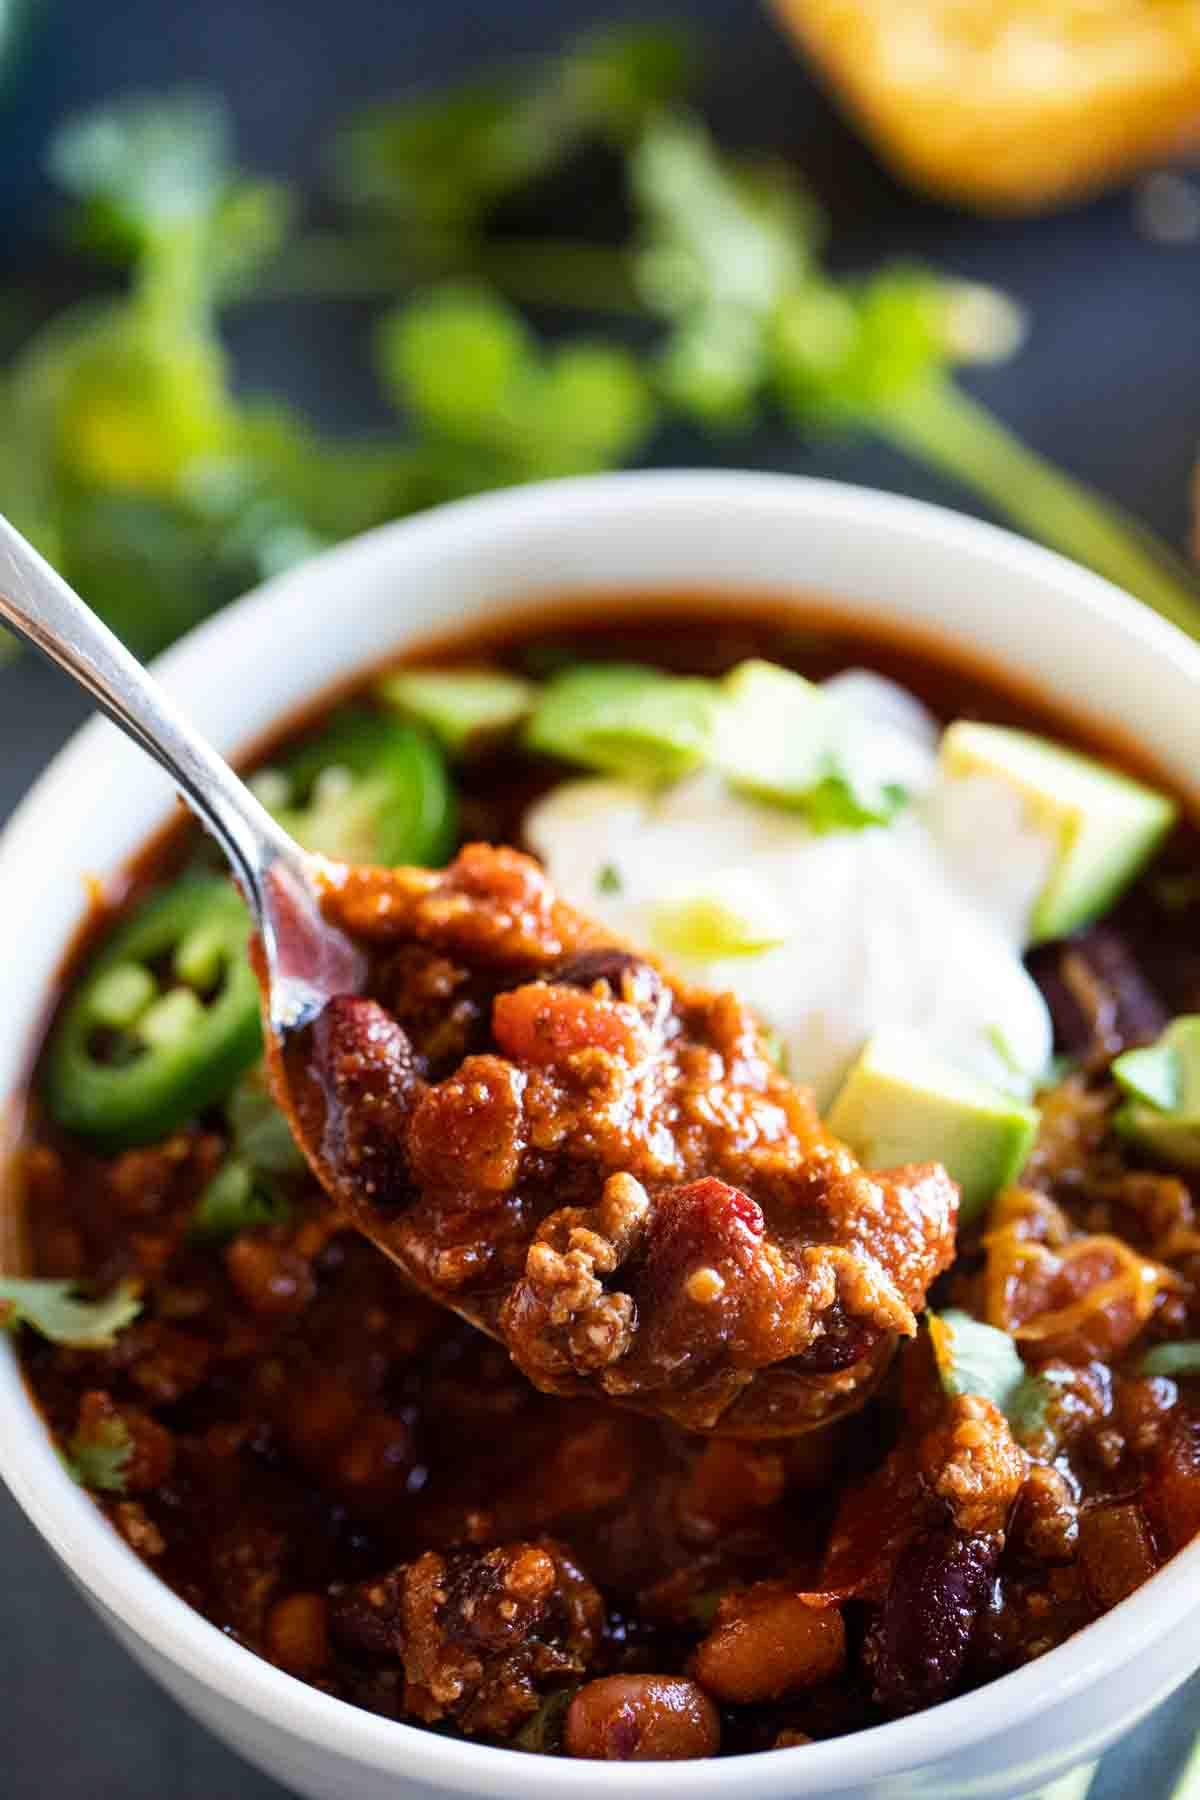 spoon full of chili topped with sour cream and avocados